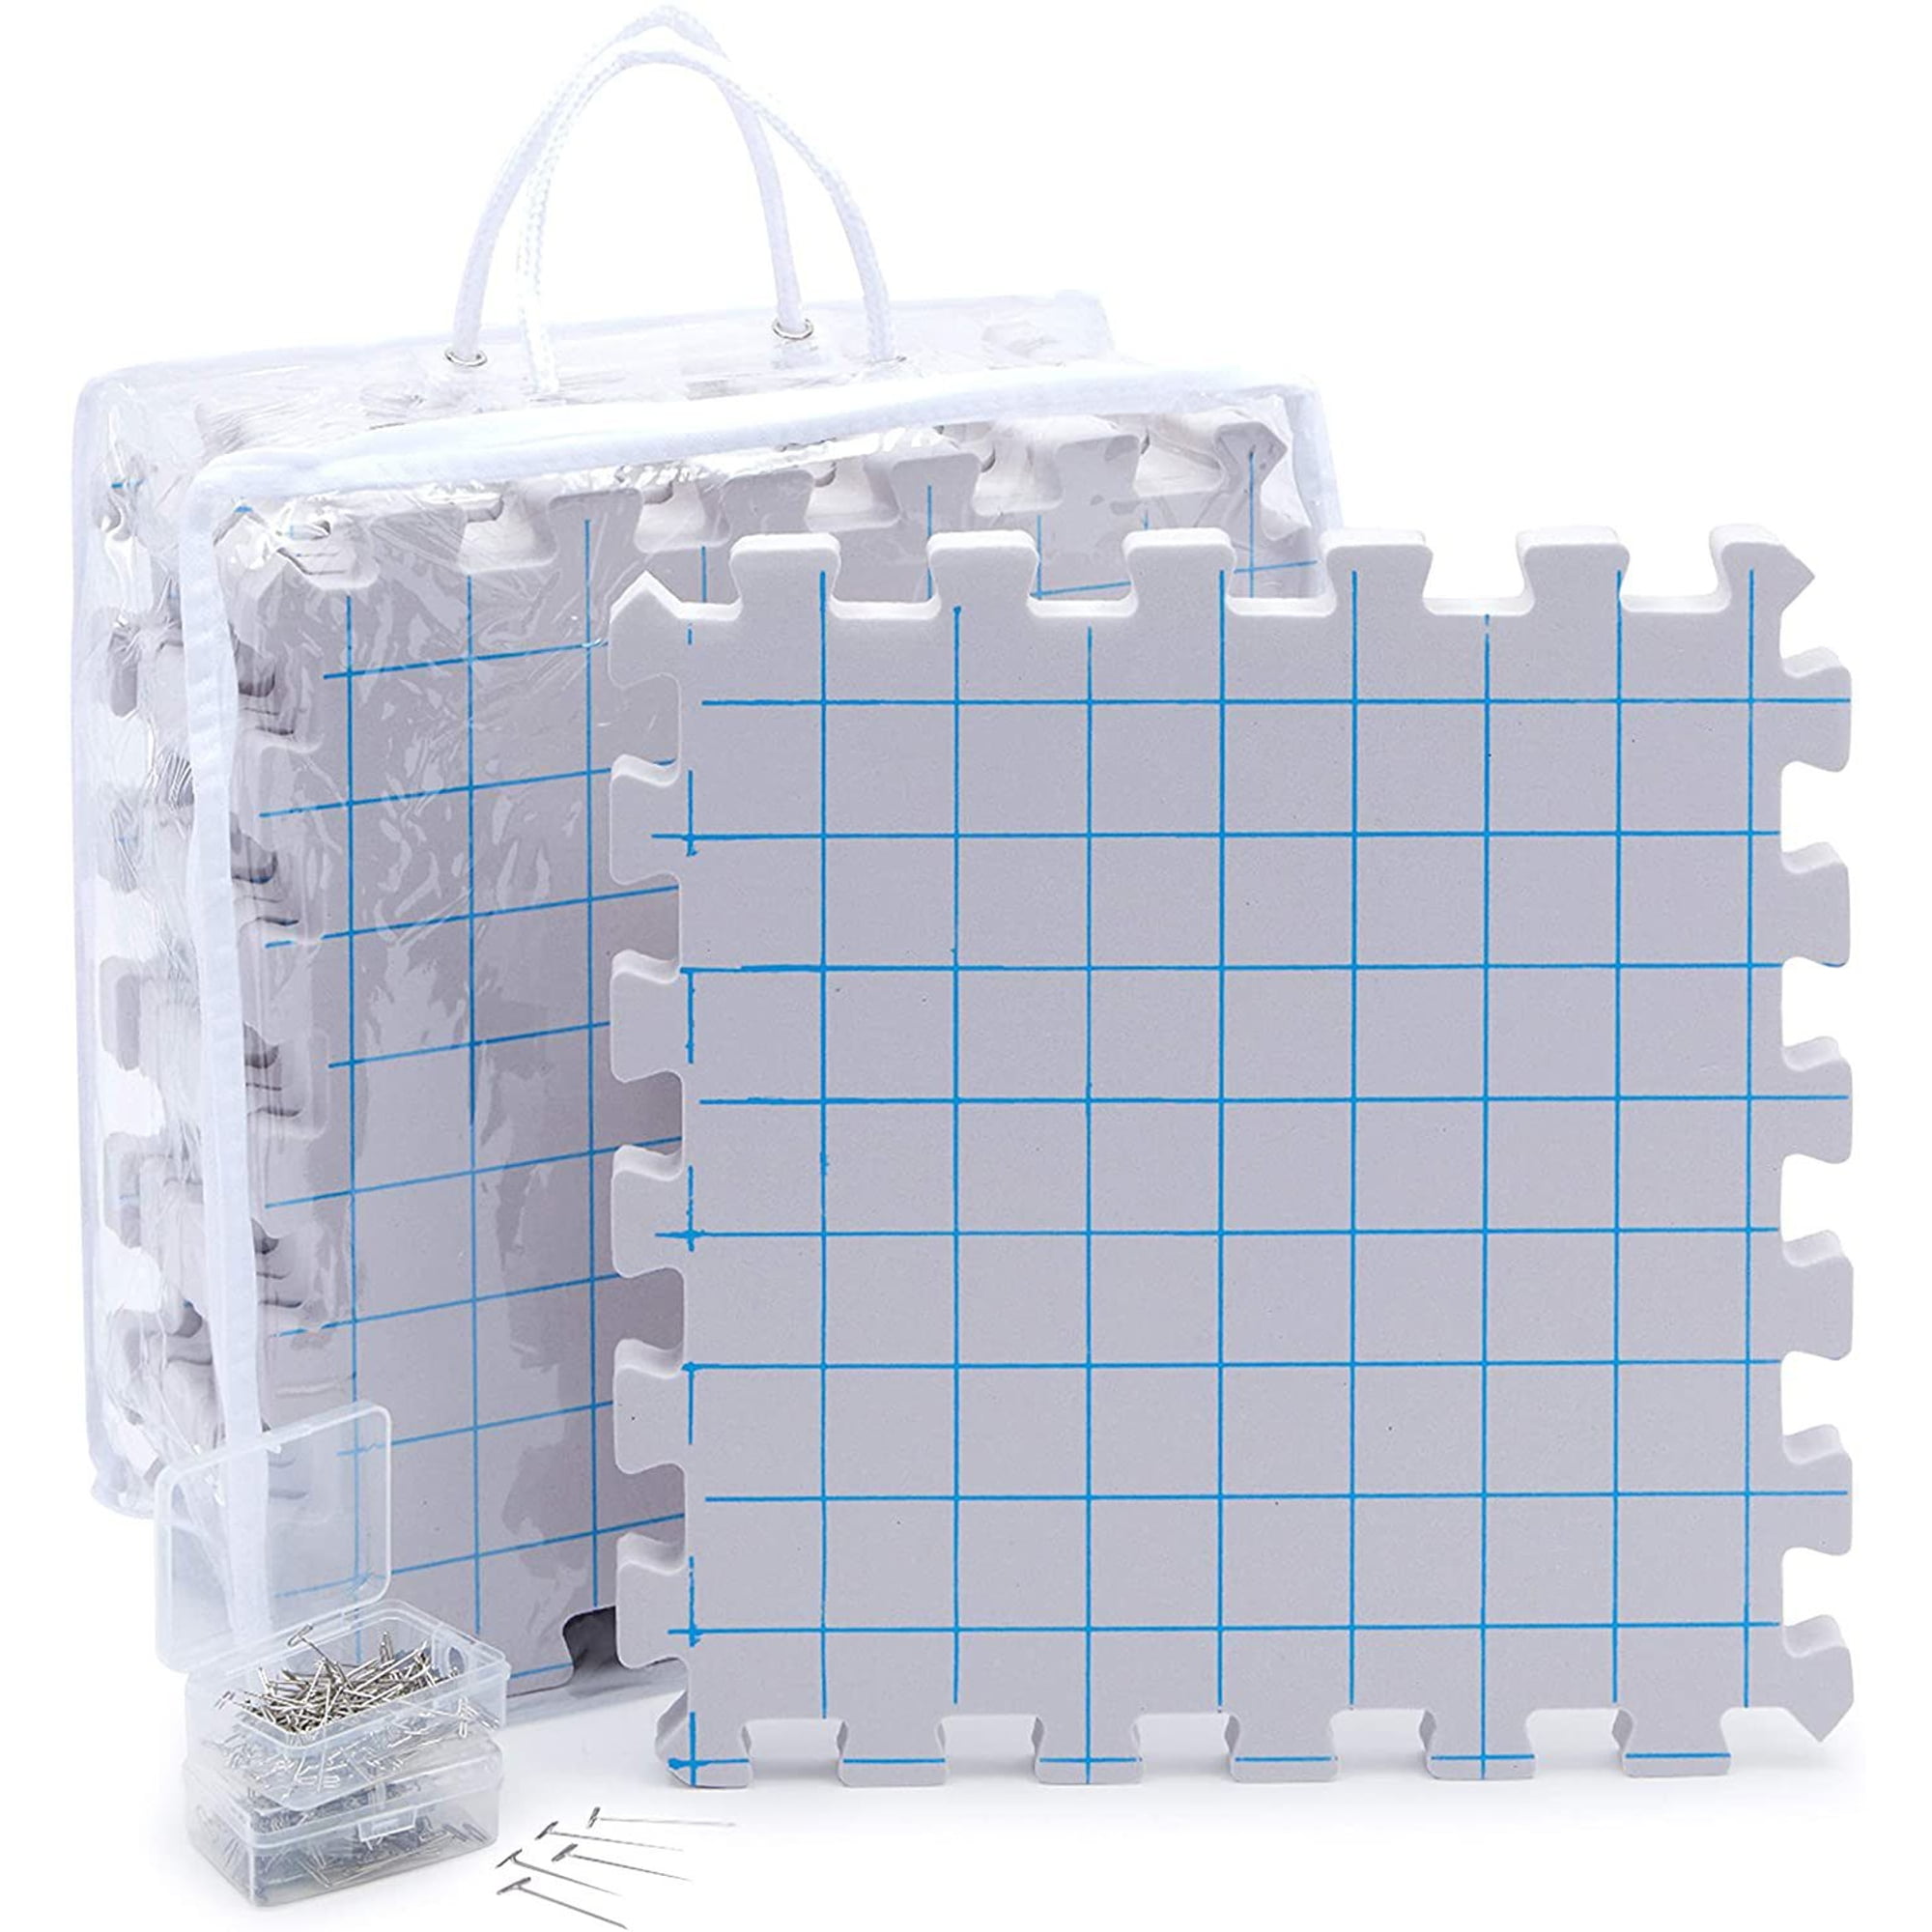 Blocking Mats For Knitting[9-pack], Extra Thick Blocking Boards With Grids  For Crochet Projects Or Needlepoint, Knitting Mats With 100 T-pins And A Co